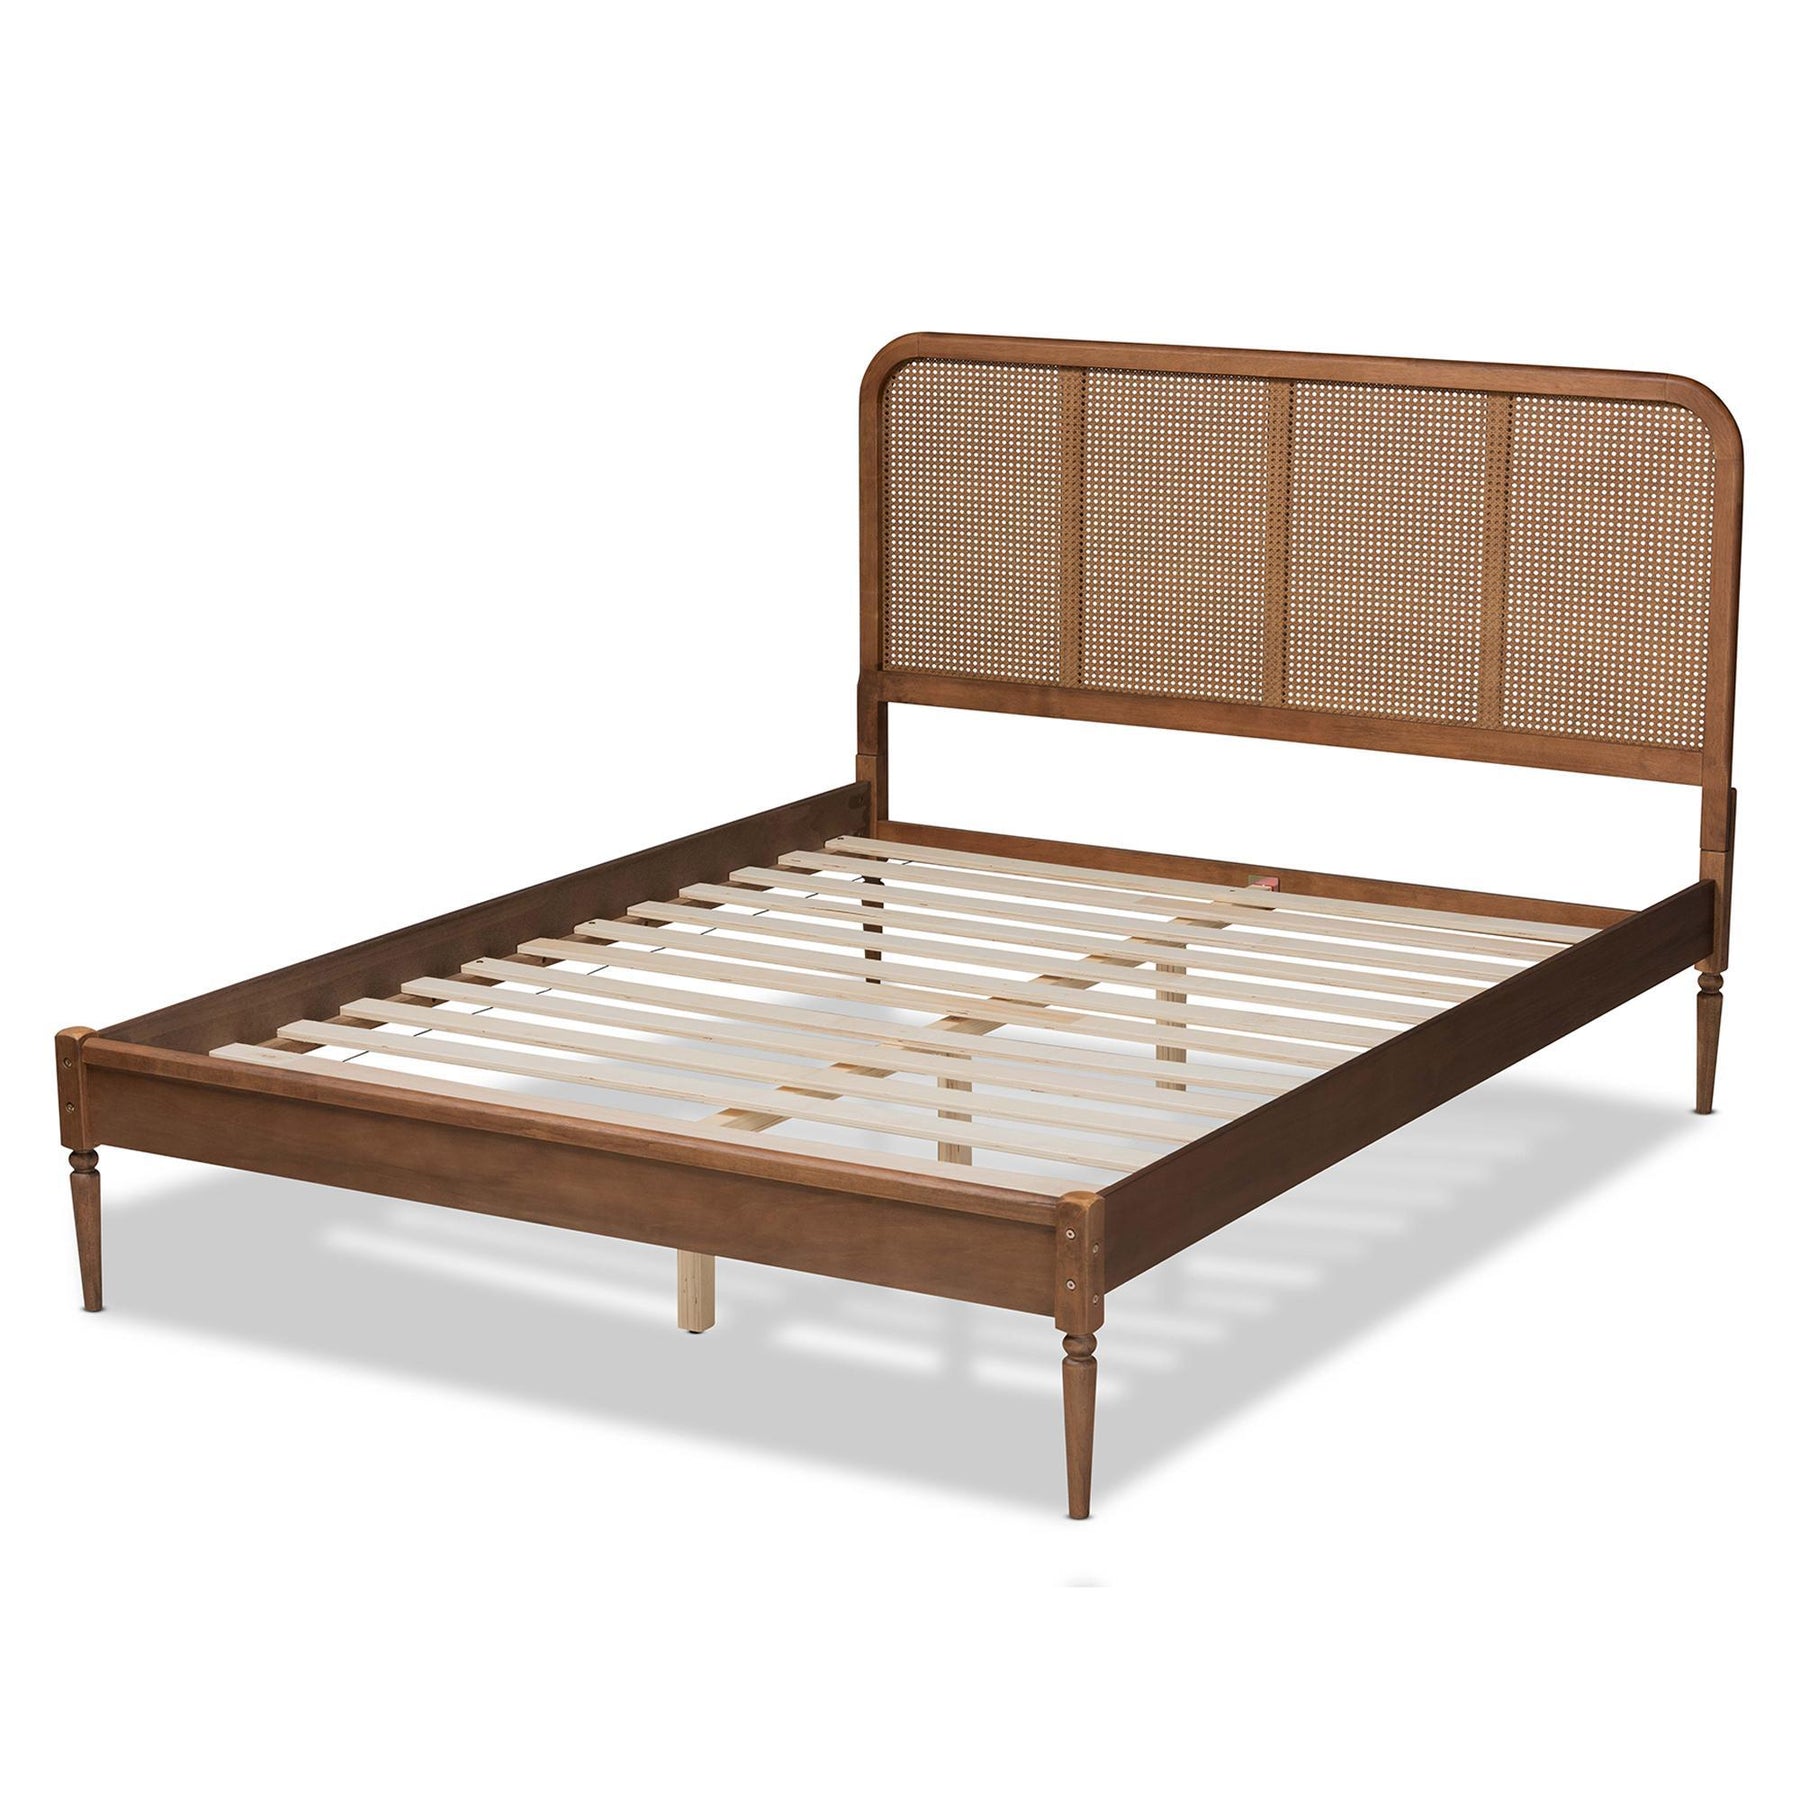 Baxton Studio Elston Mid-Century Modern Walnut Brown Finished Wood And Synthetic Rattan Queen Size Platform Bed - MG0056-Walnut Rattan/Walnut-Queen